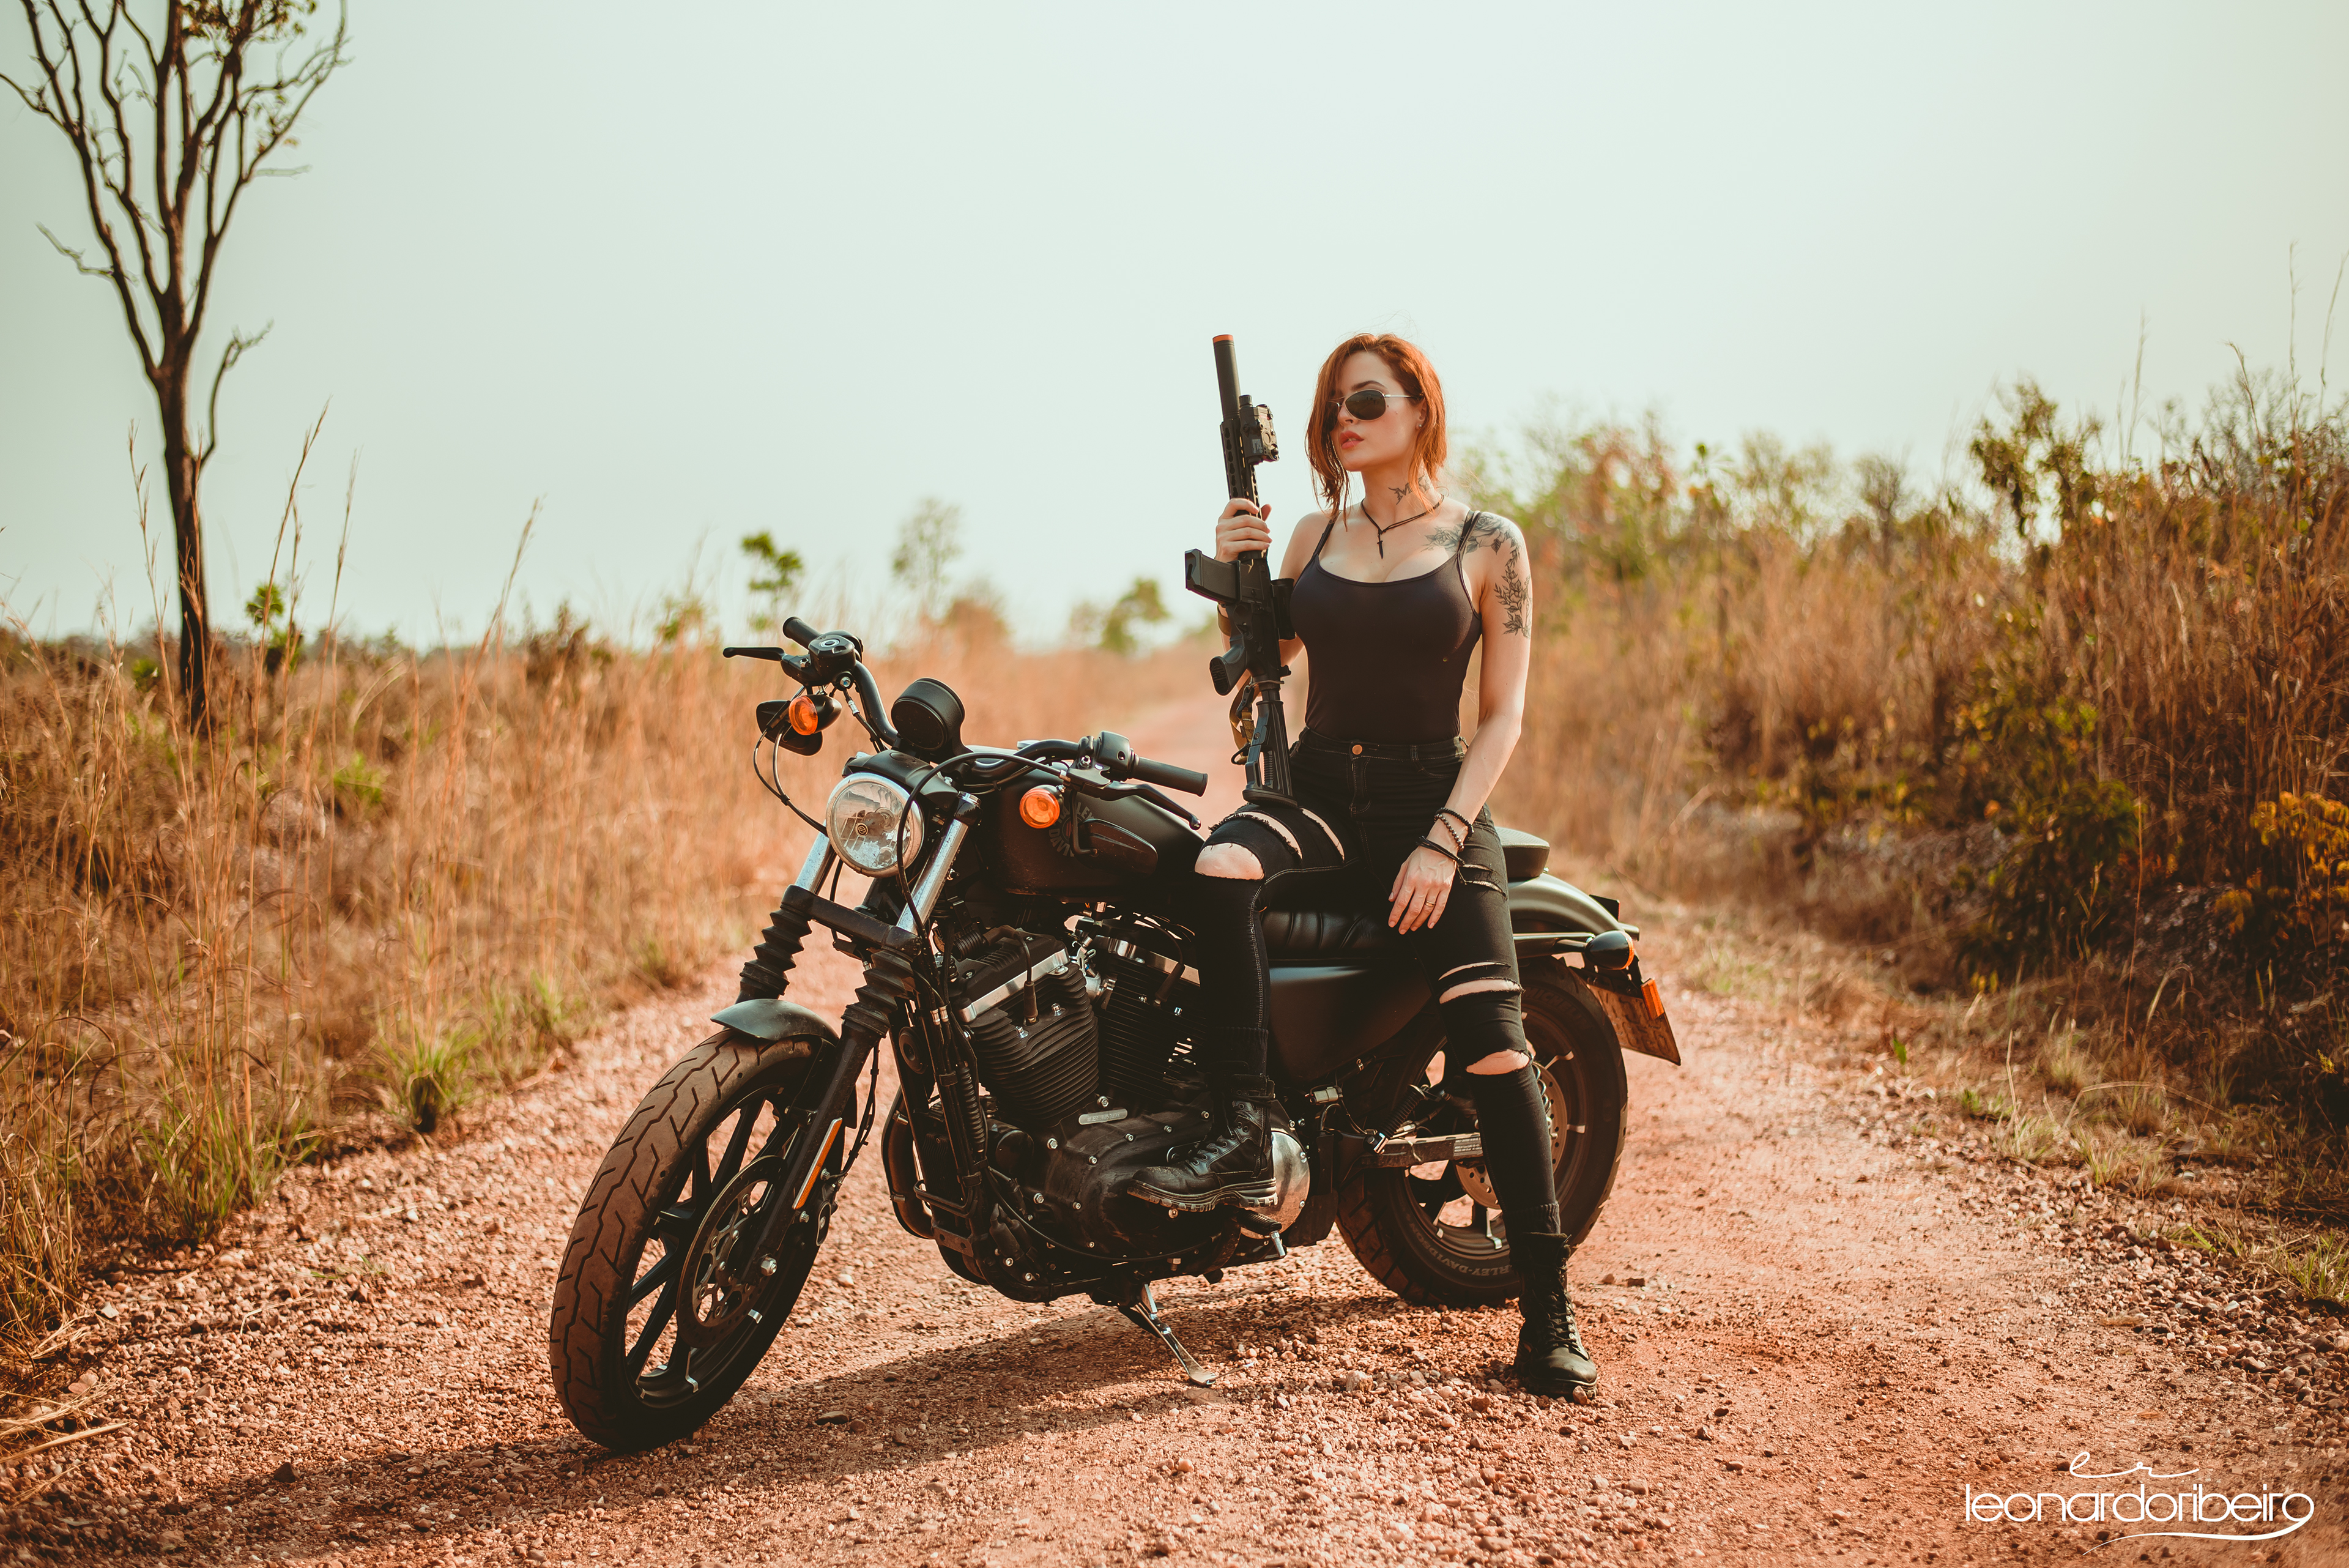 People 3840x2563 Leonardo Ribeiro women model redhead black clothing jeans torn jeans weapon motorcycle women with motorcycles women outdoors Iron 883 Harley-Davidson